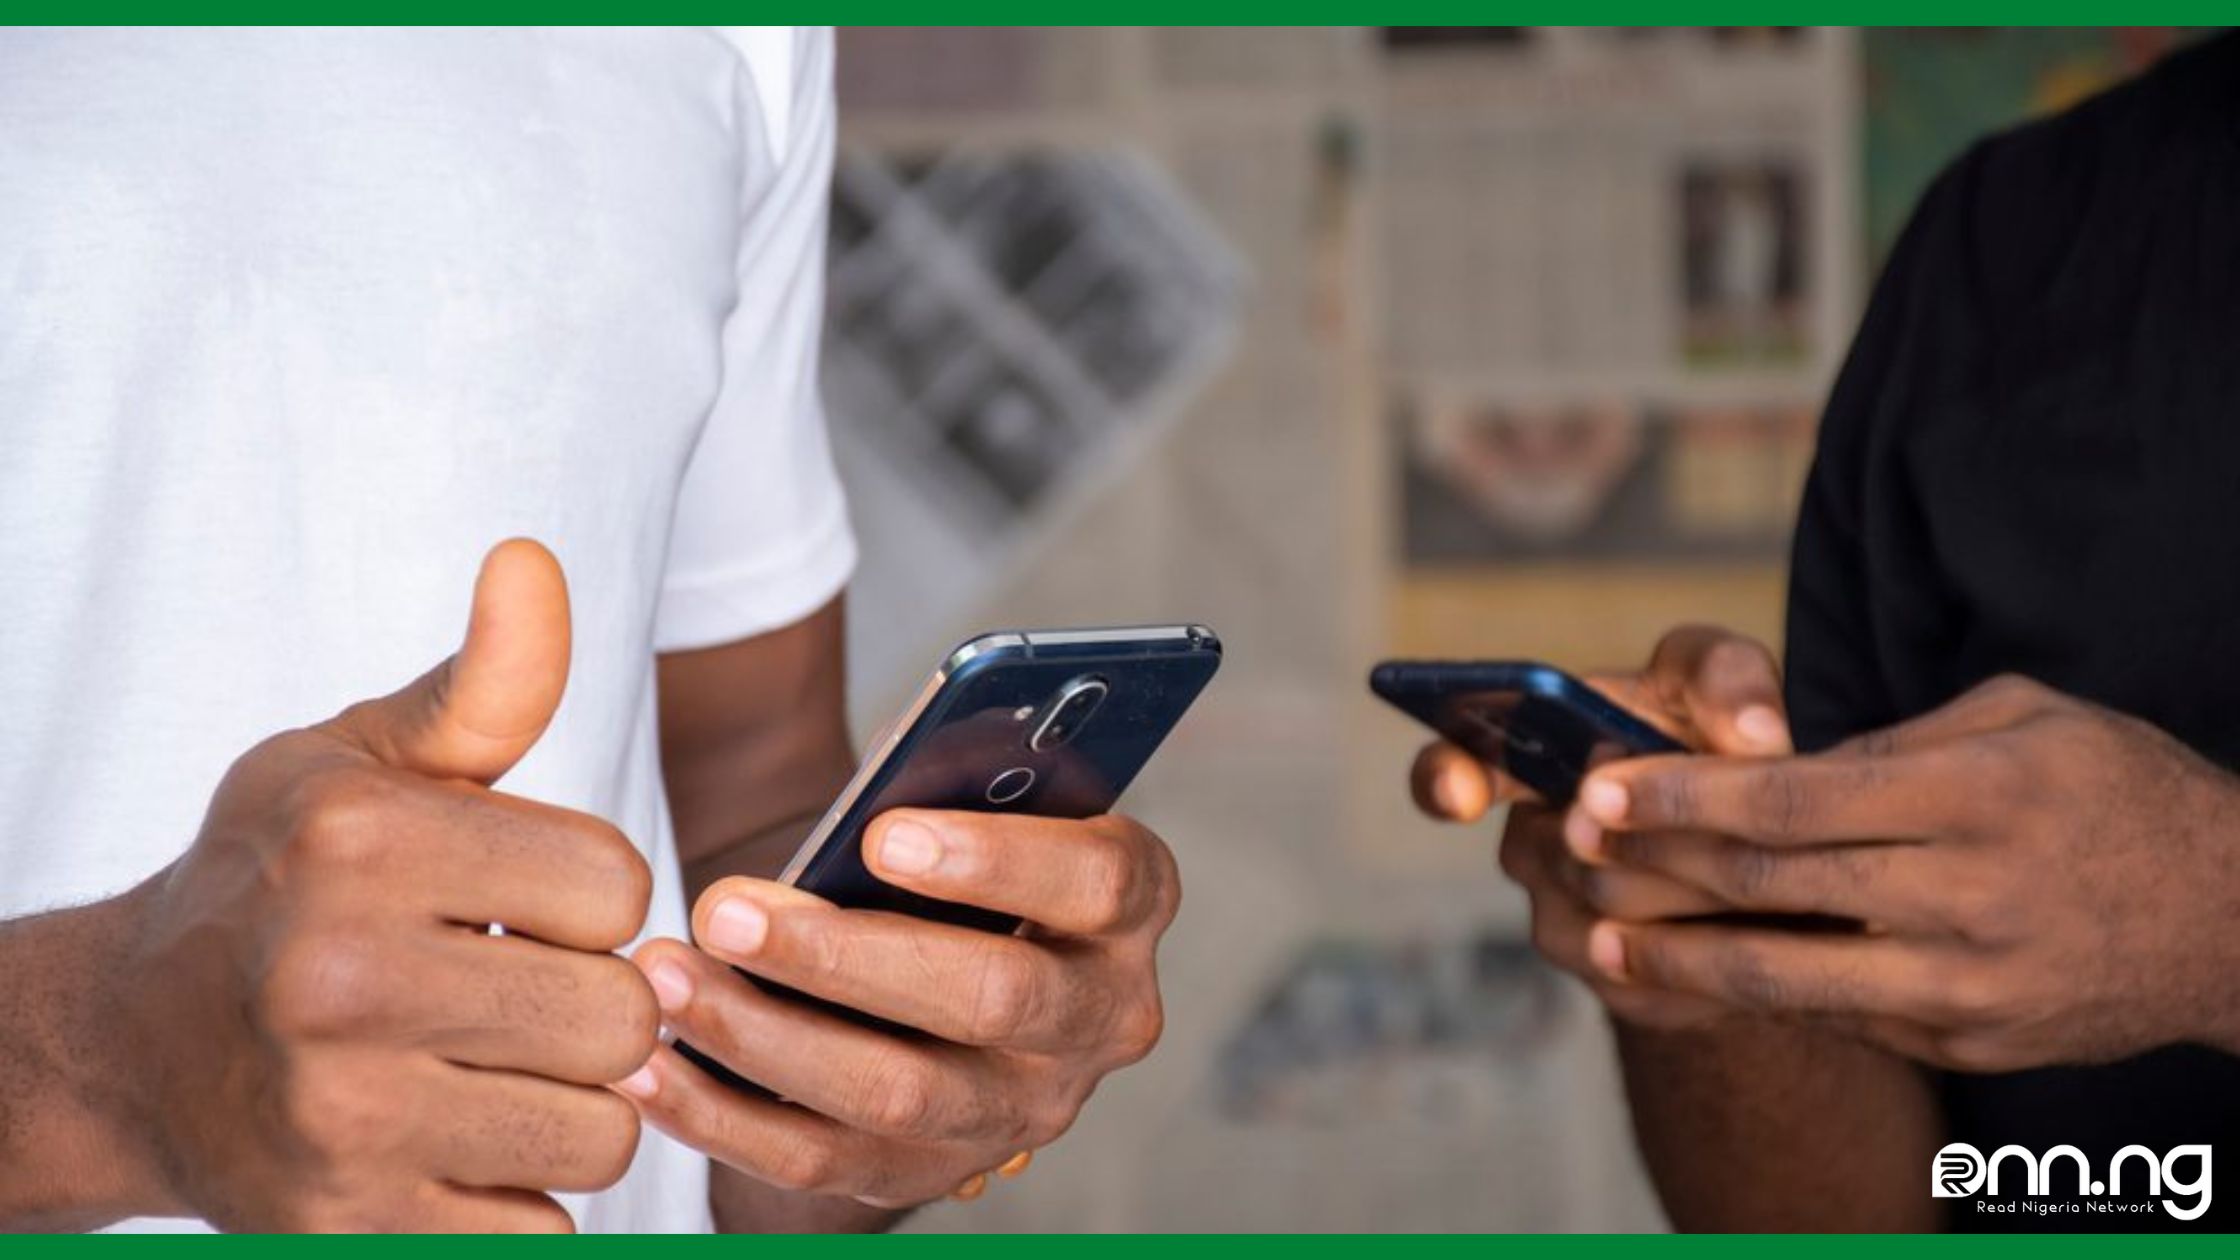 Nigeria’s connected mobile lines hit 319.6 million